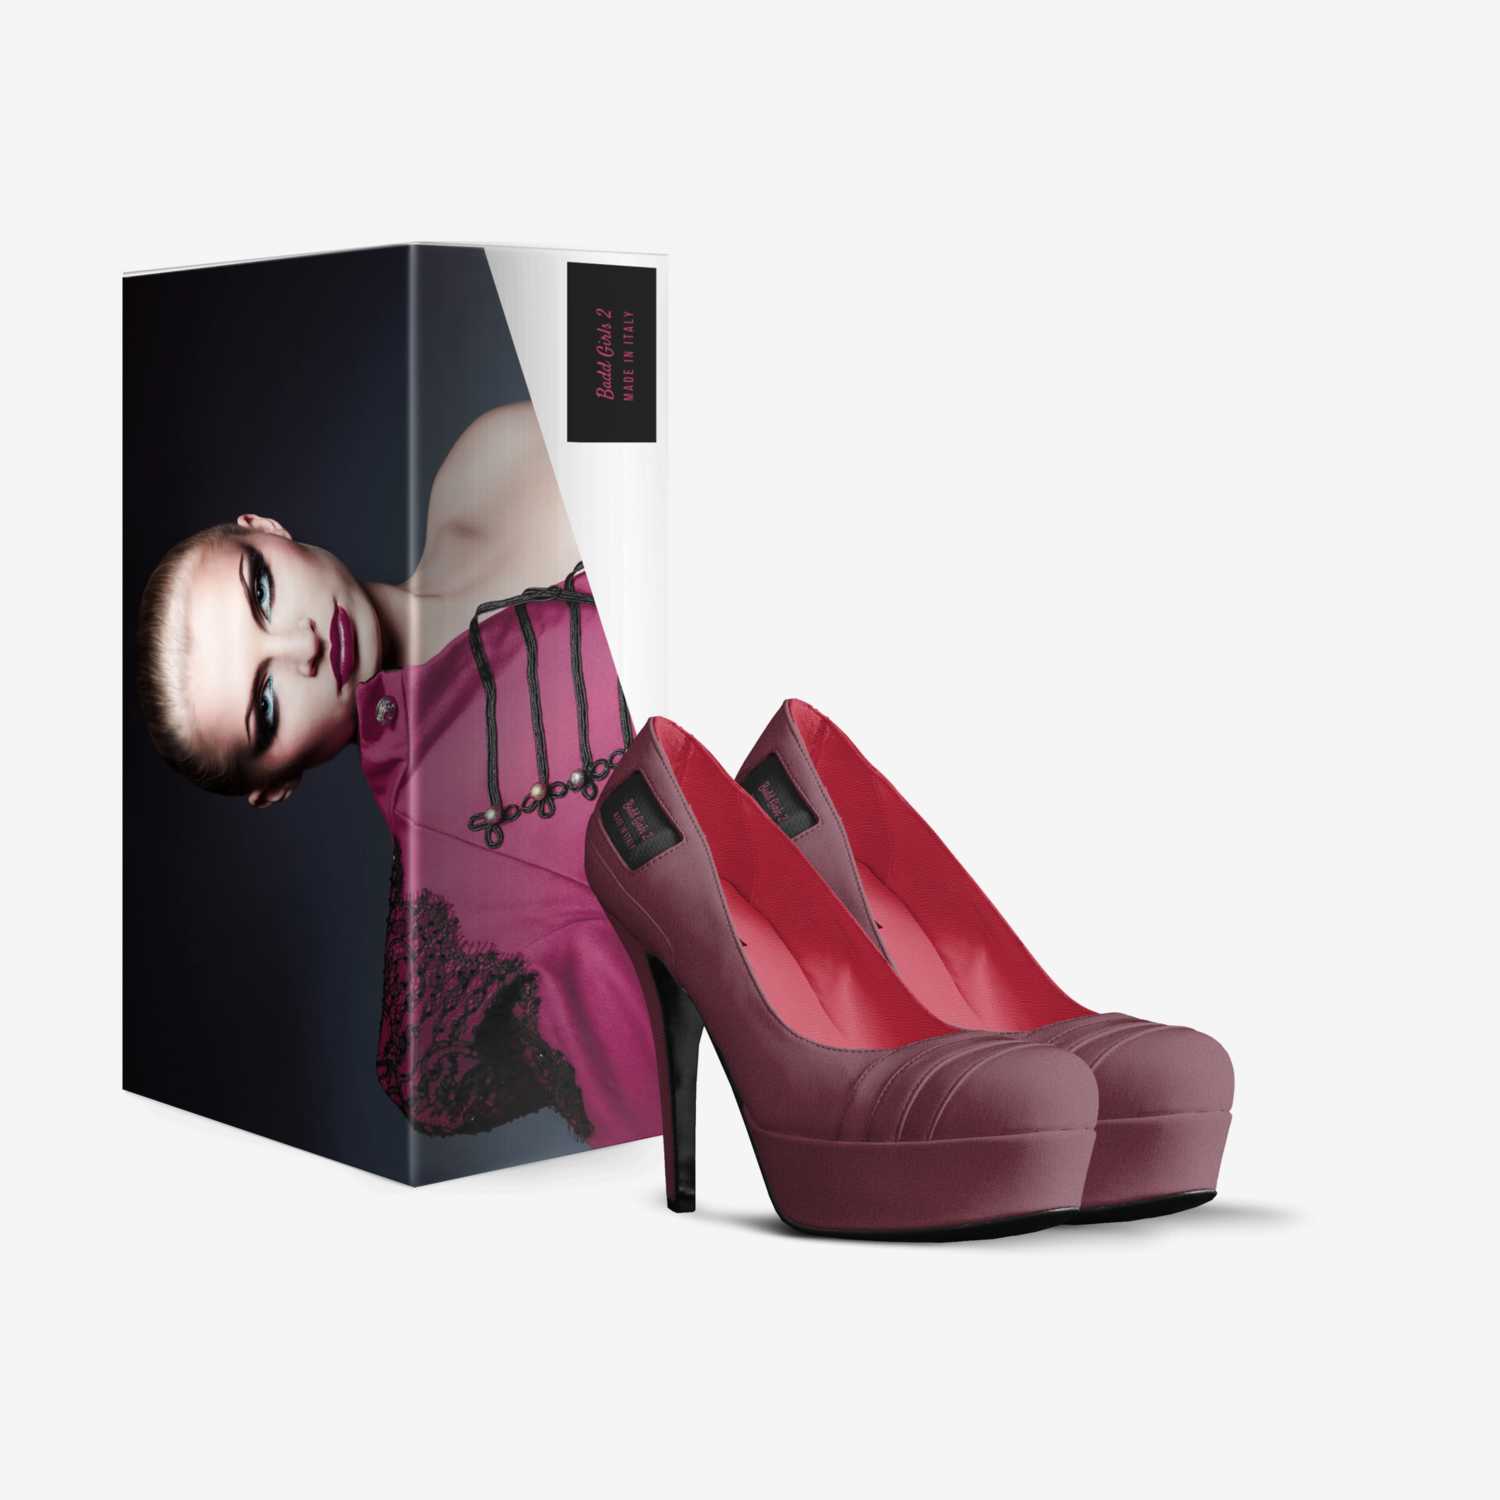 Badd Girls 2 custom made in Italy shoes by Alexander Bowie | Box view